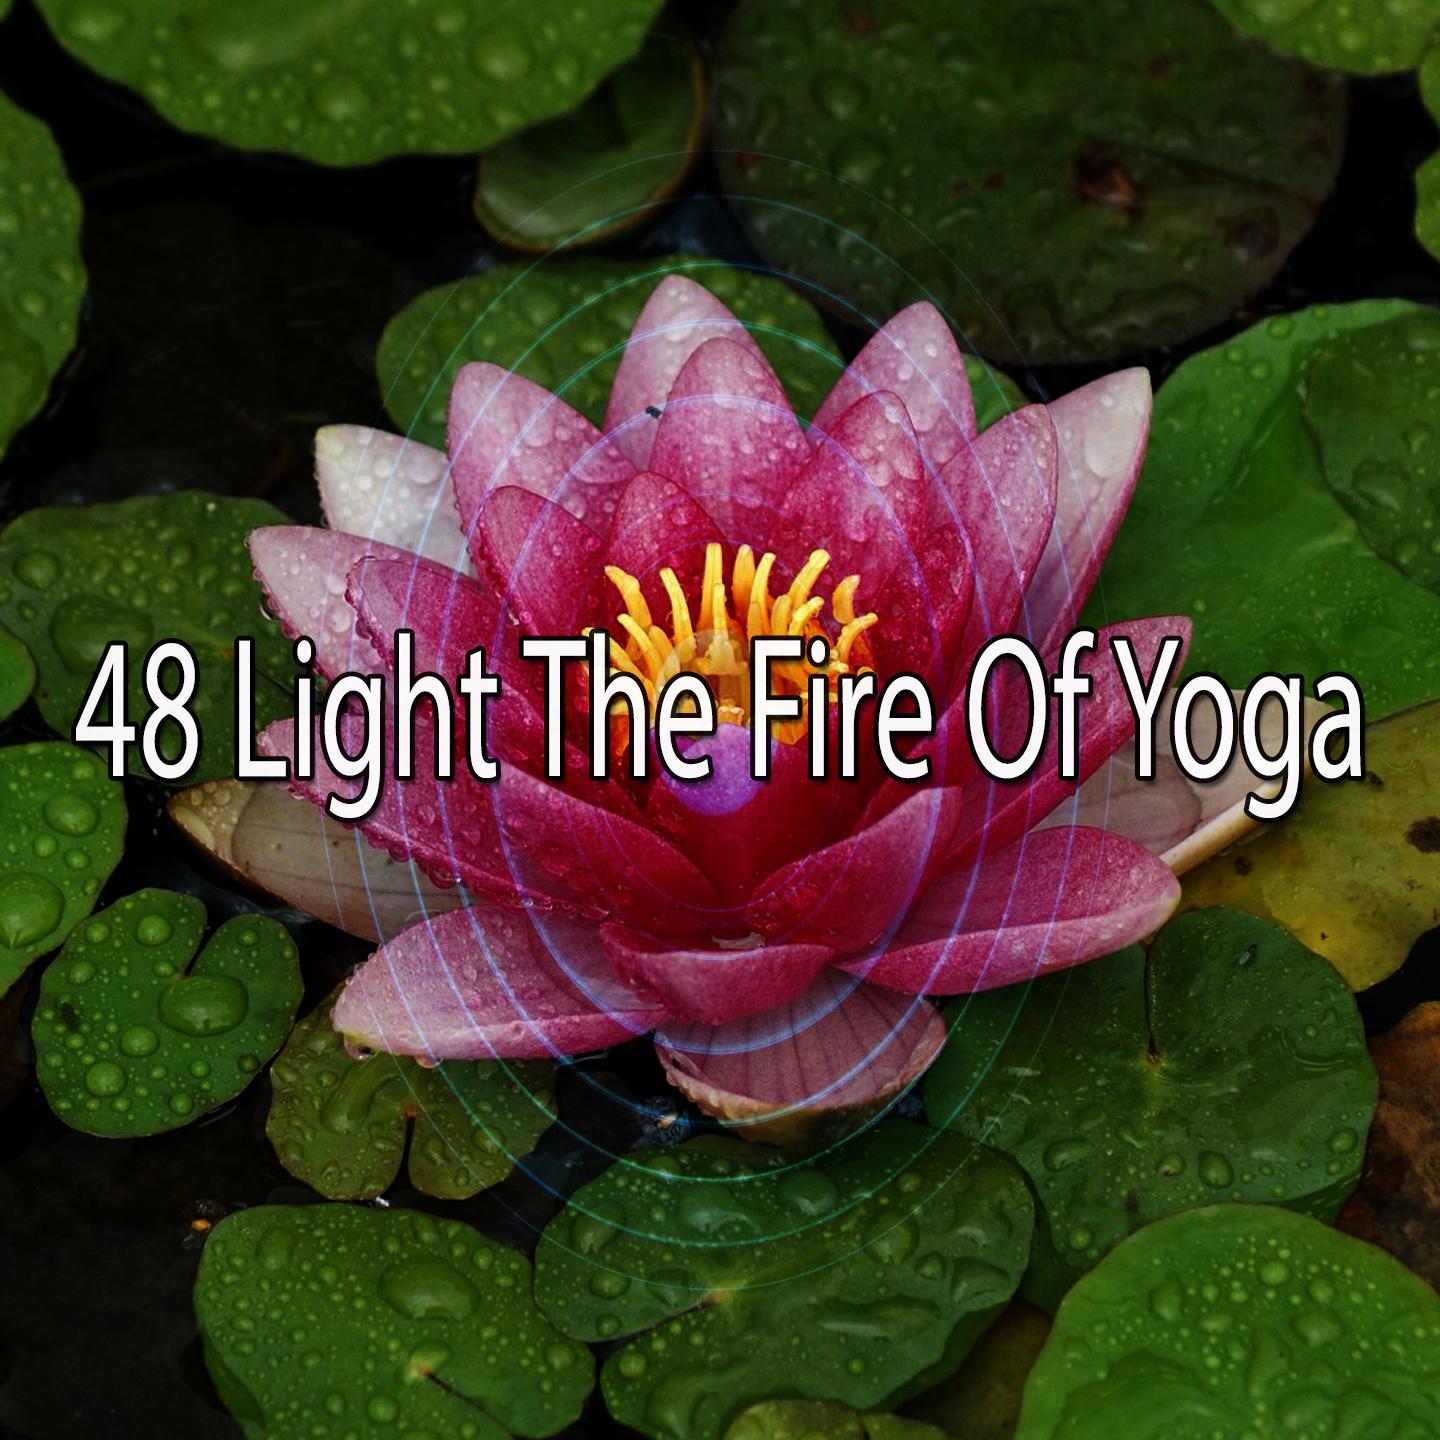 48 Light the Fire of Yoga